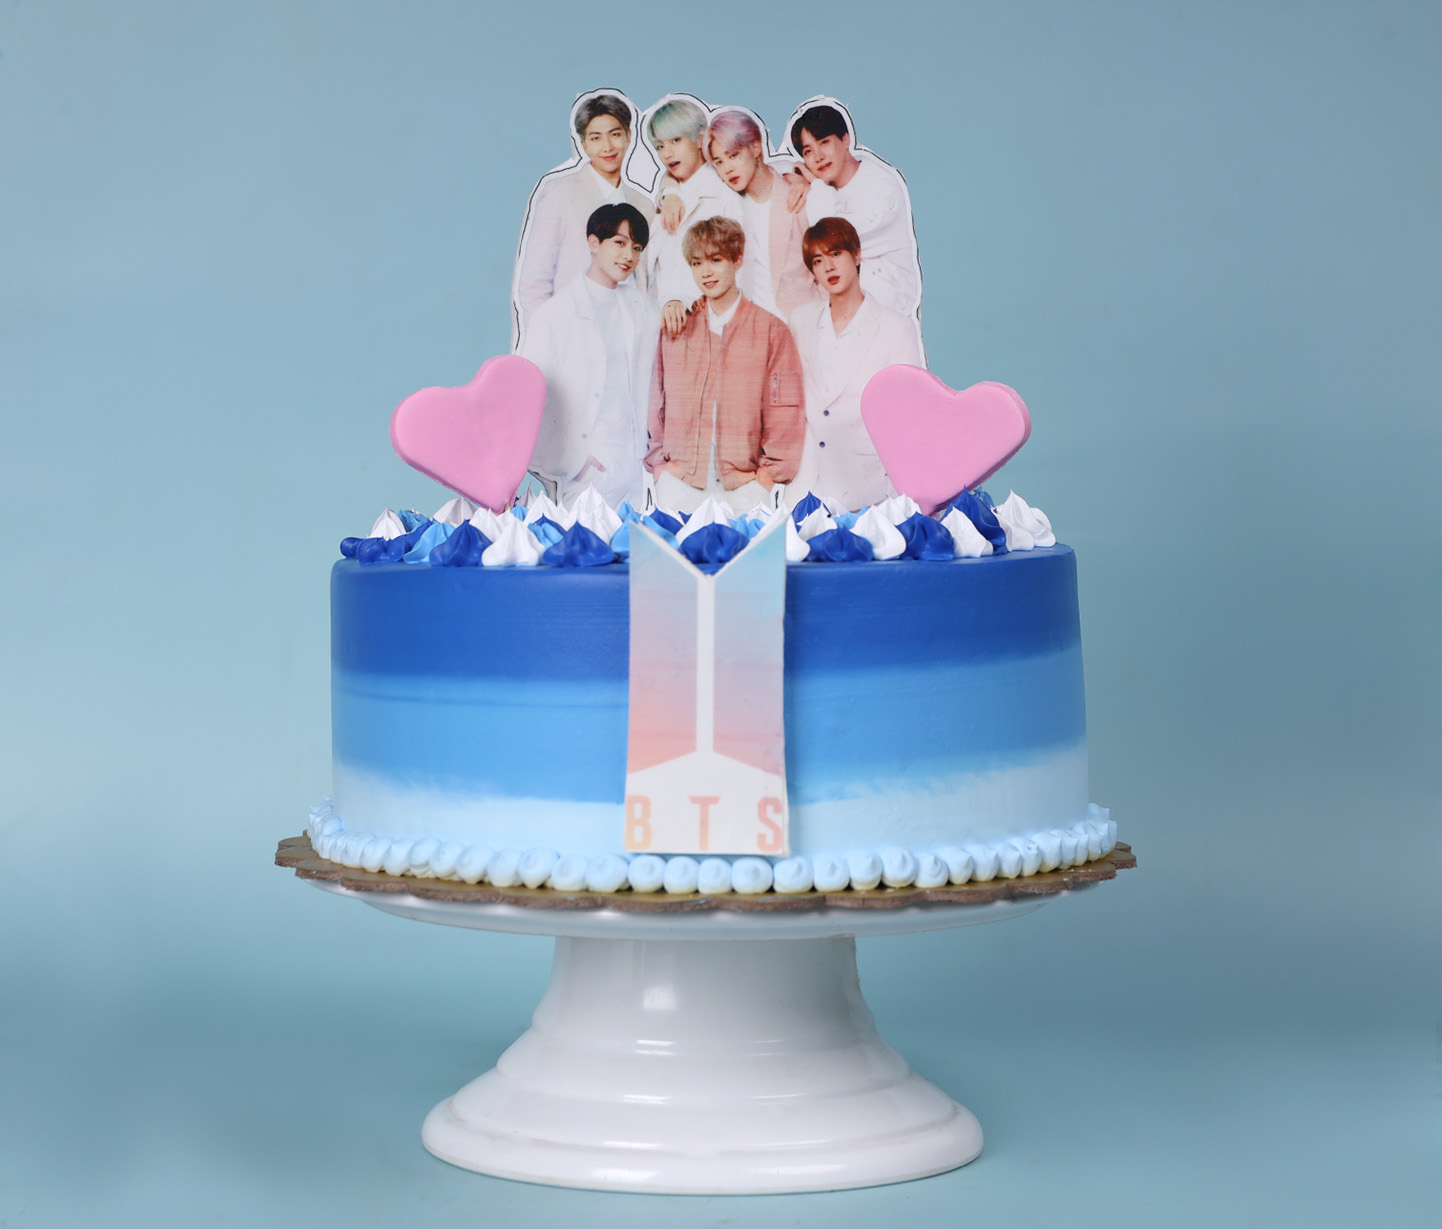 BTS Themed Birthday Cake - Celebrate with the Iconic K-pop Group | UG Cakes